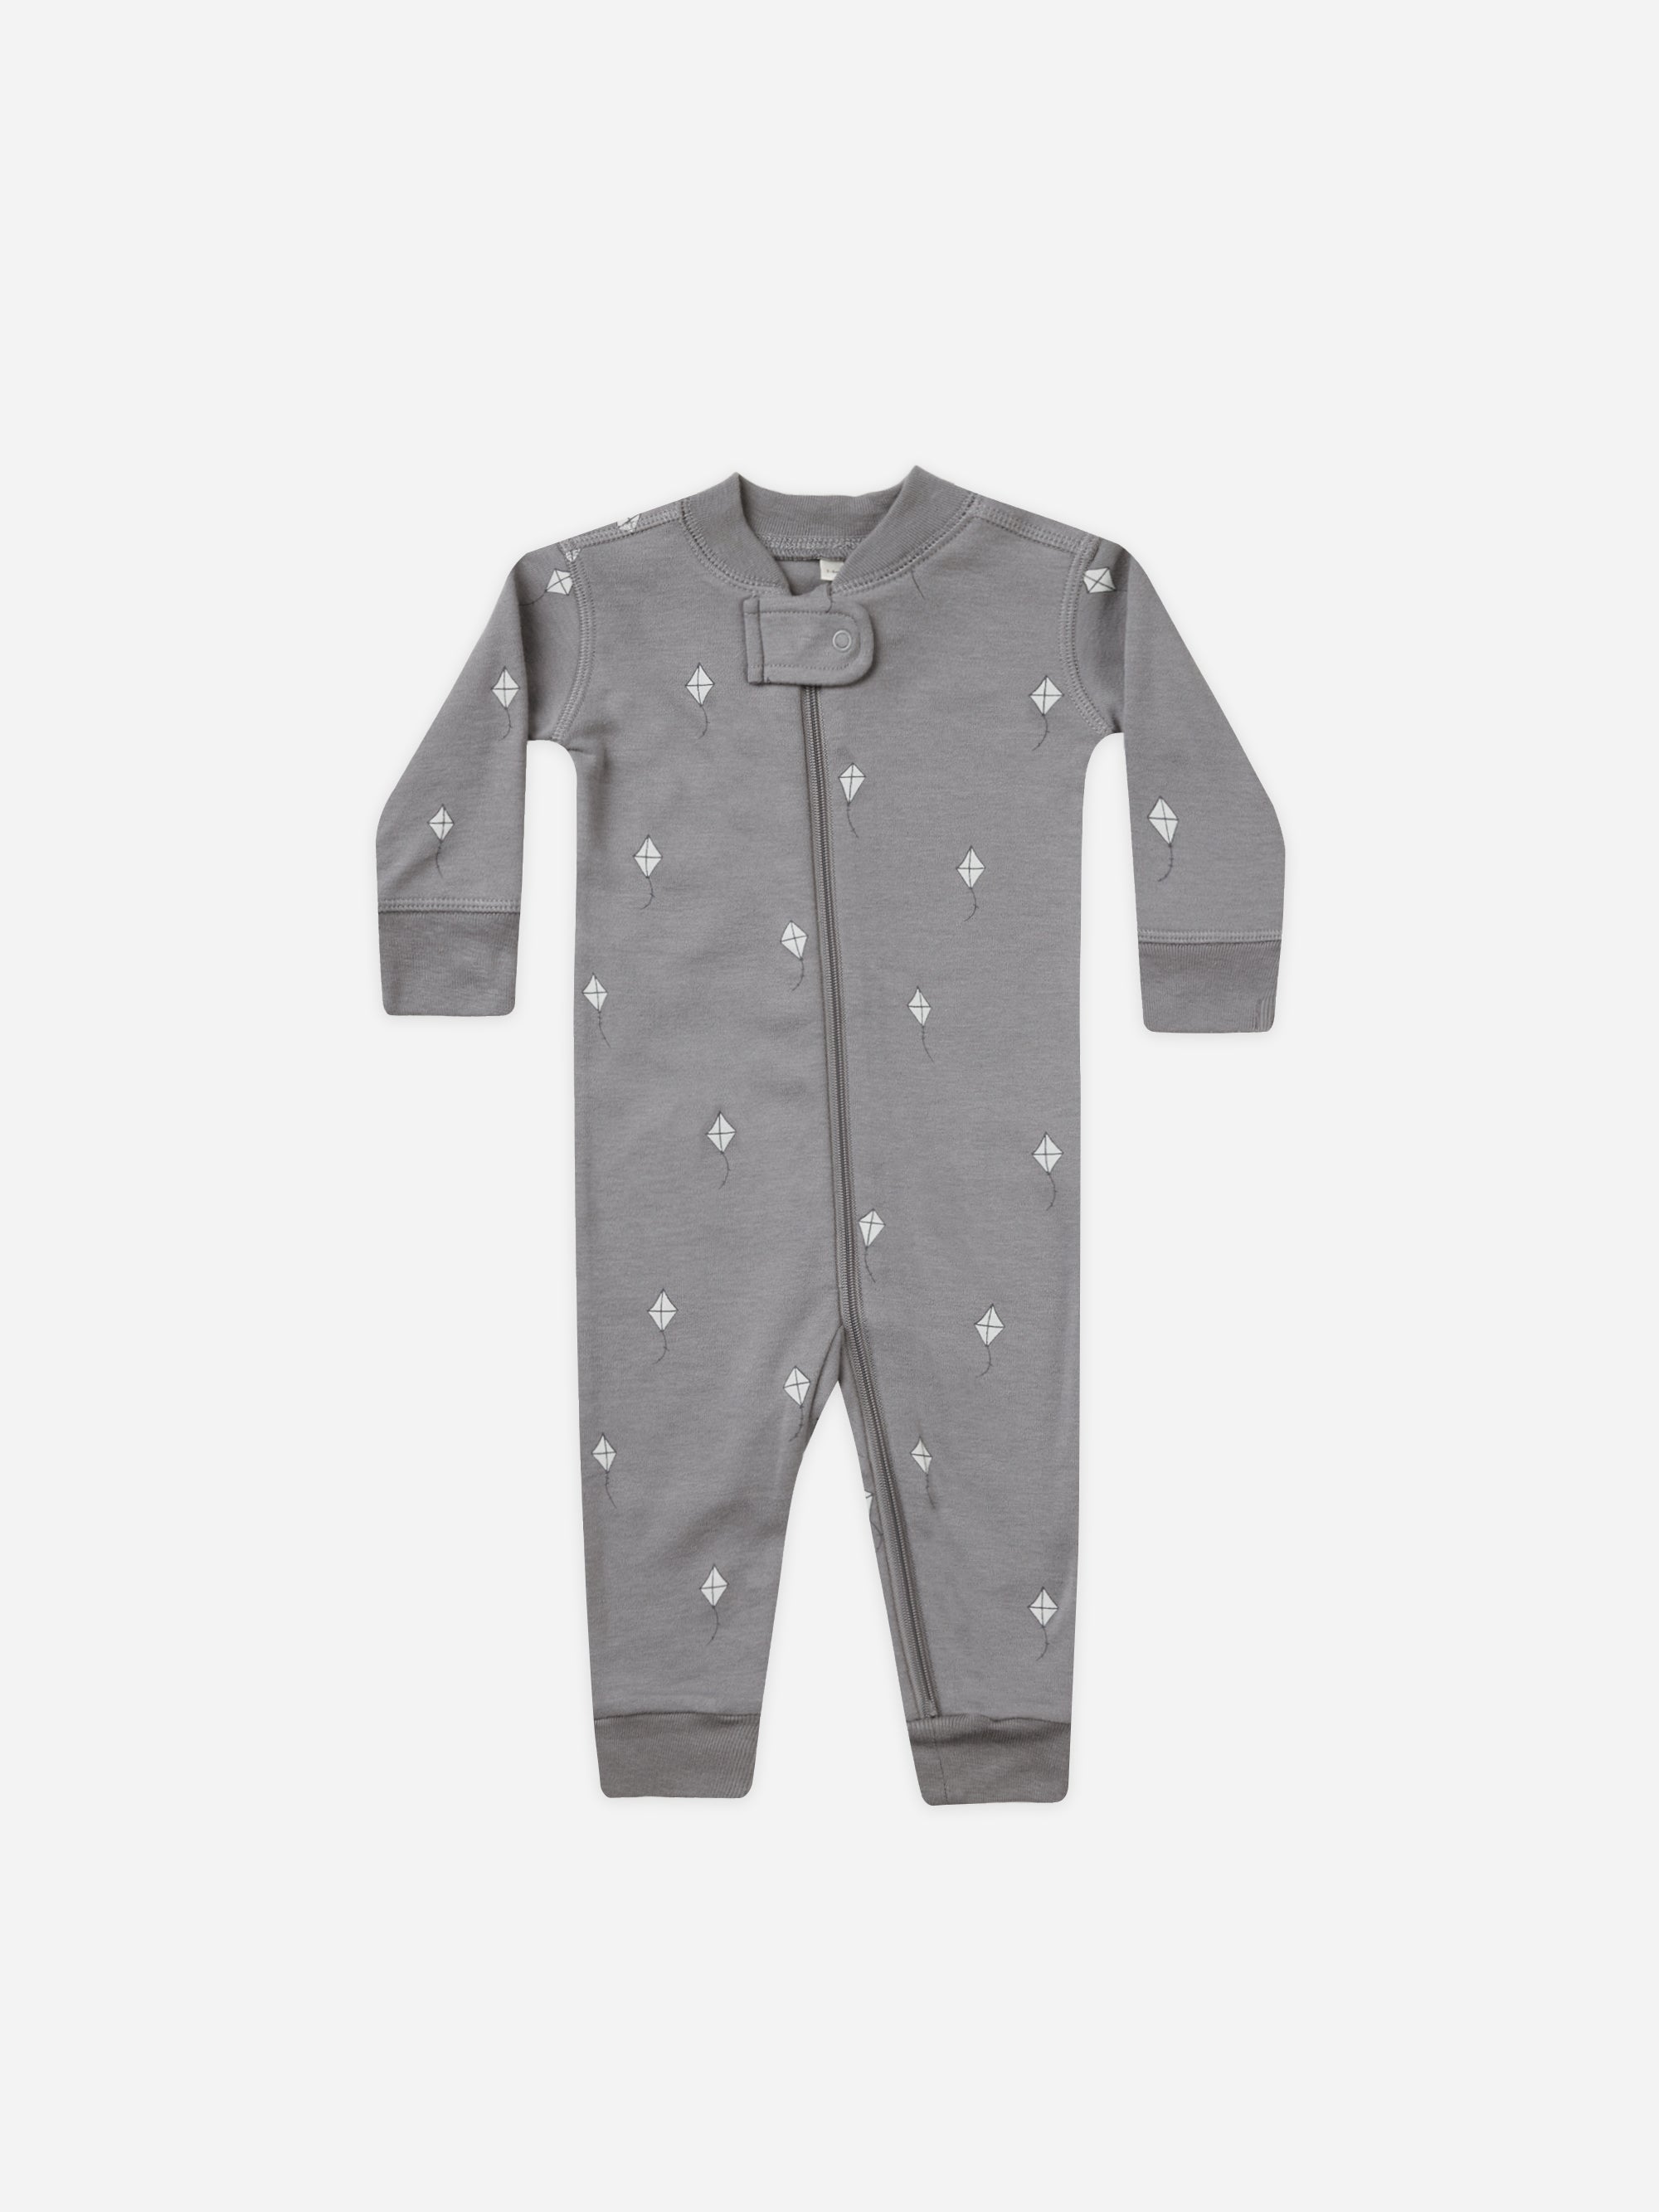 Zip Long Sleeve Sleeper || Kites - Rylee + Cru | Kids Clothes | Trendy Baby Clothes | Modern Infant Outfits |